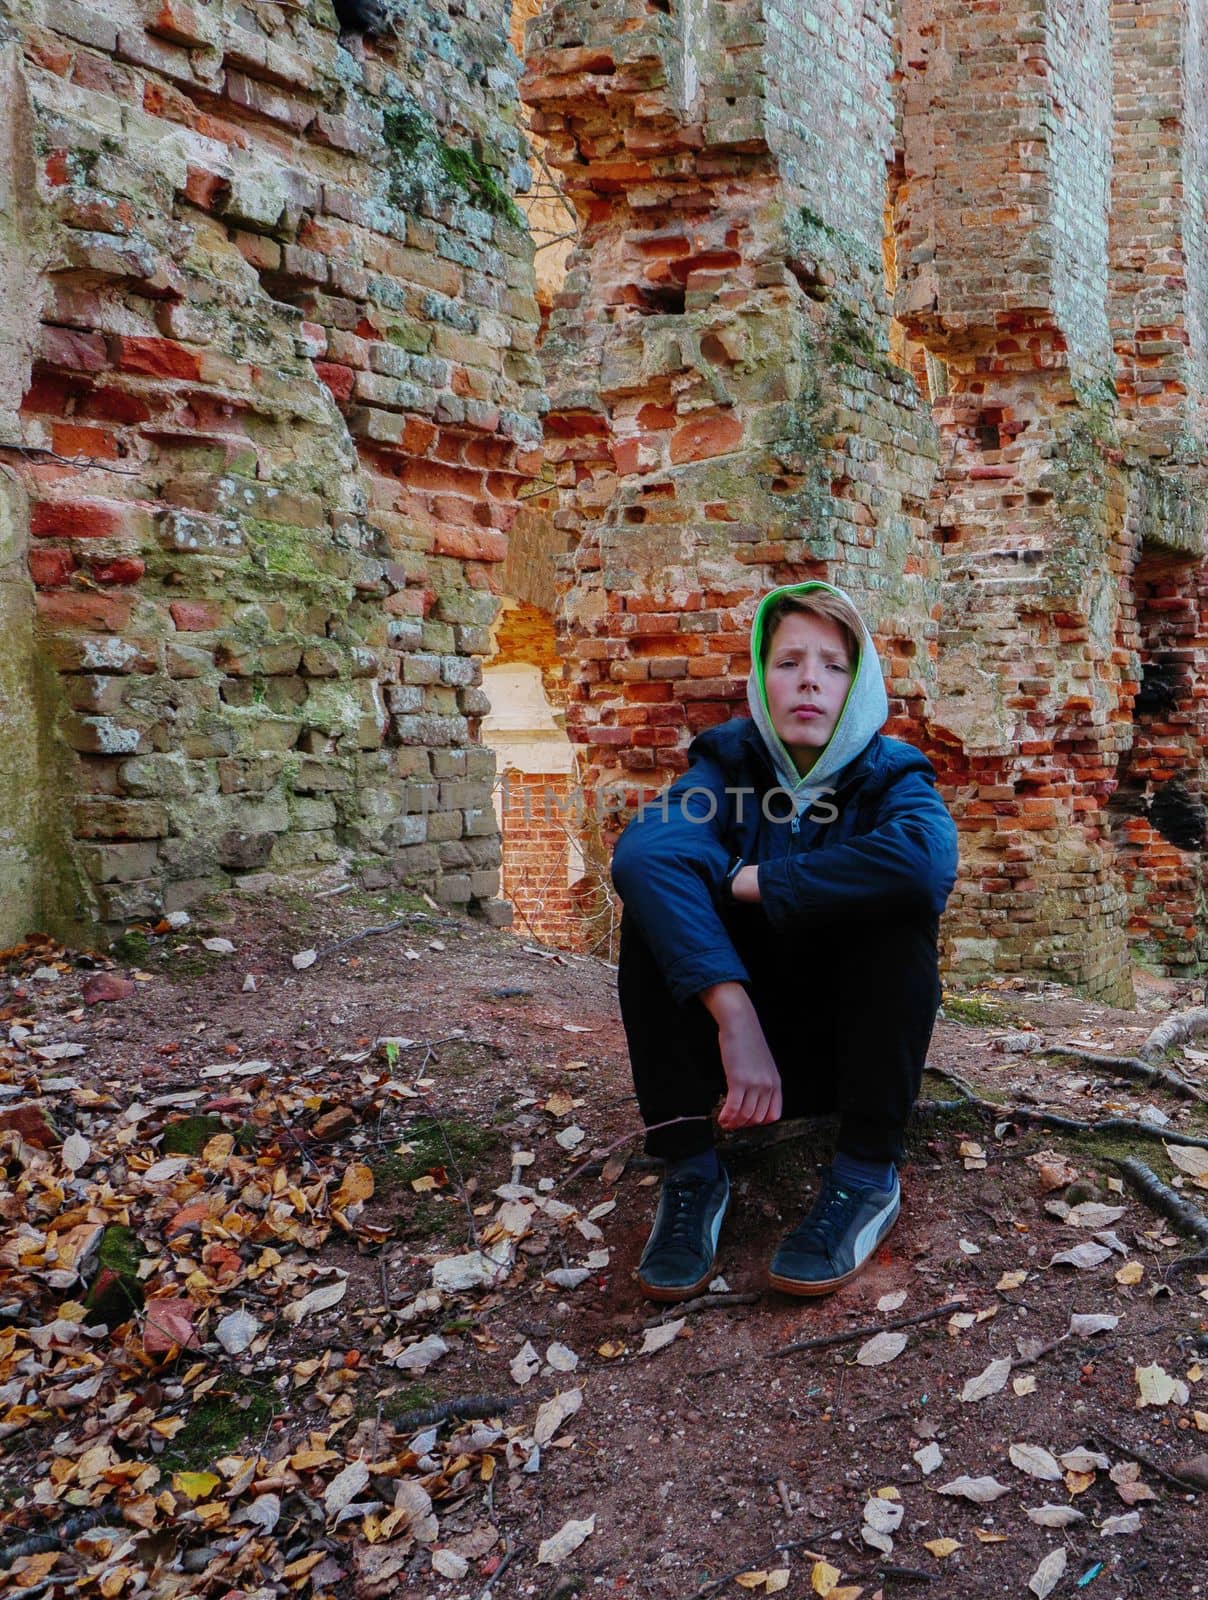 The teenager sits near a ruined brick building. by gelog67